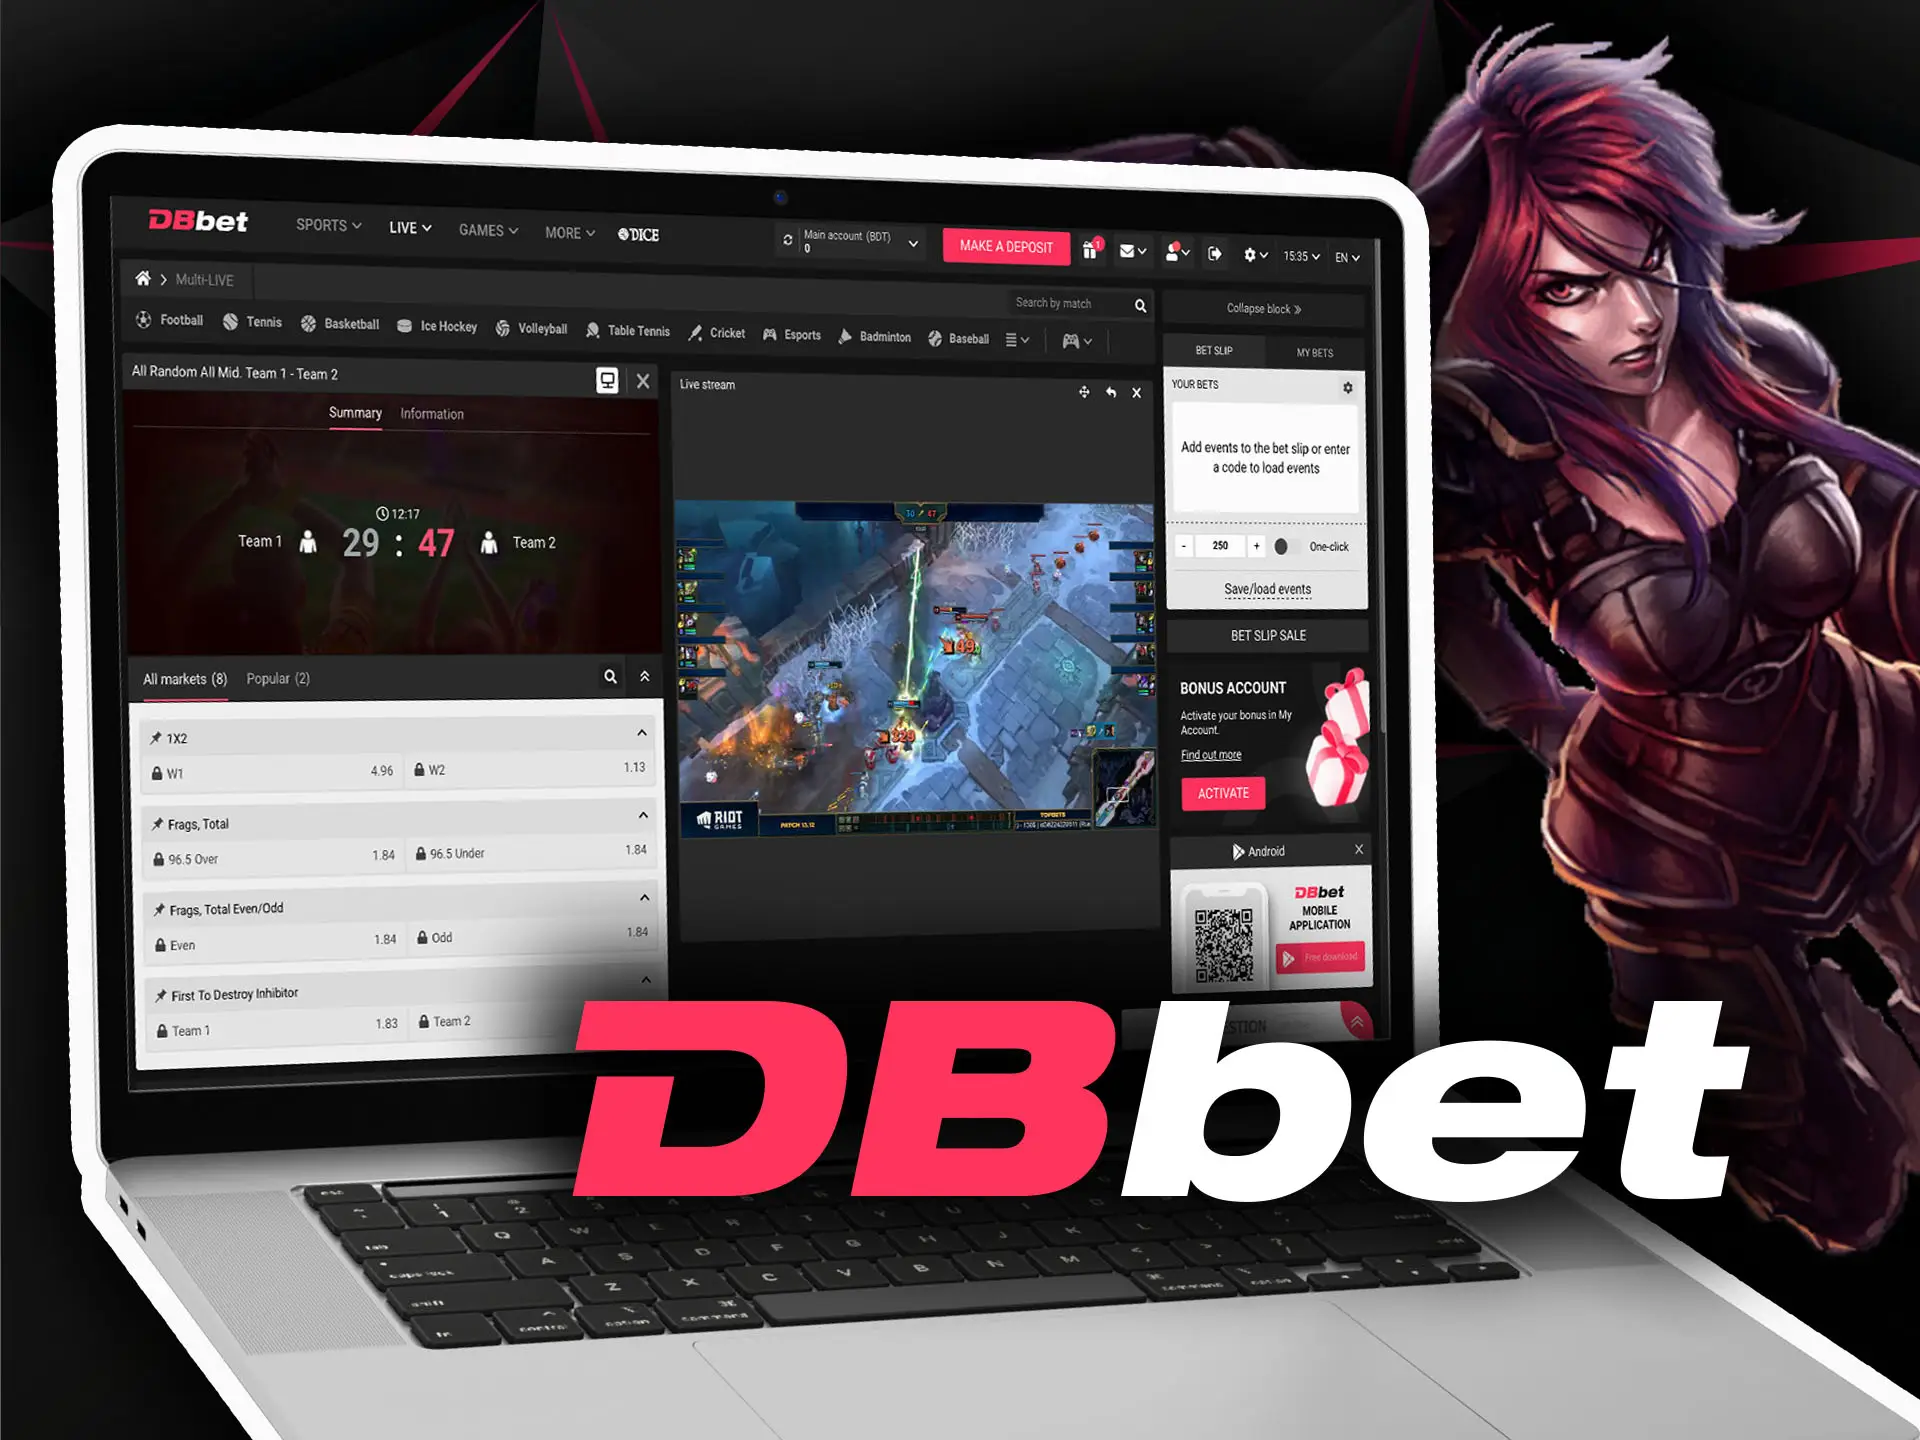 Place bets on the LOL championships on the DBbet website.